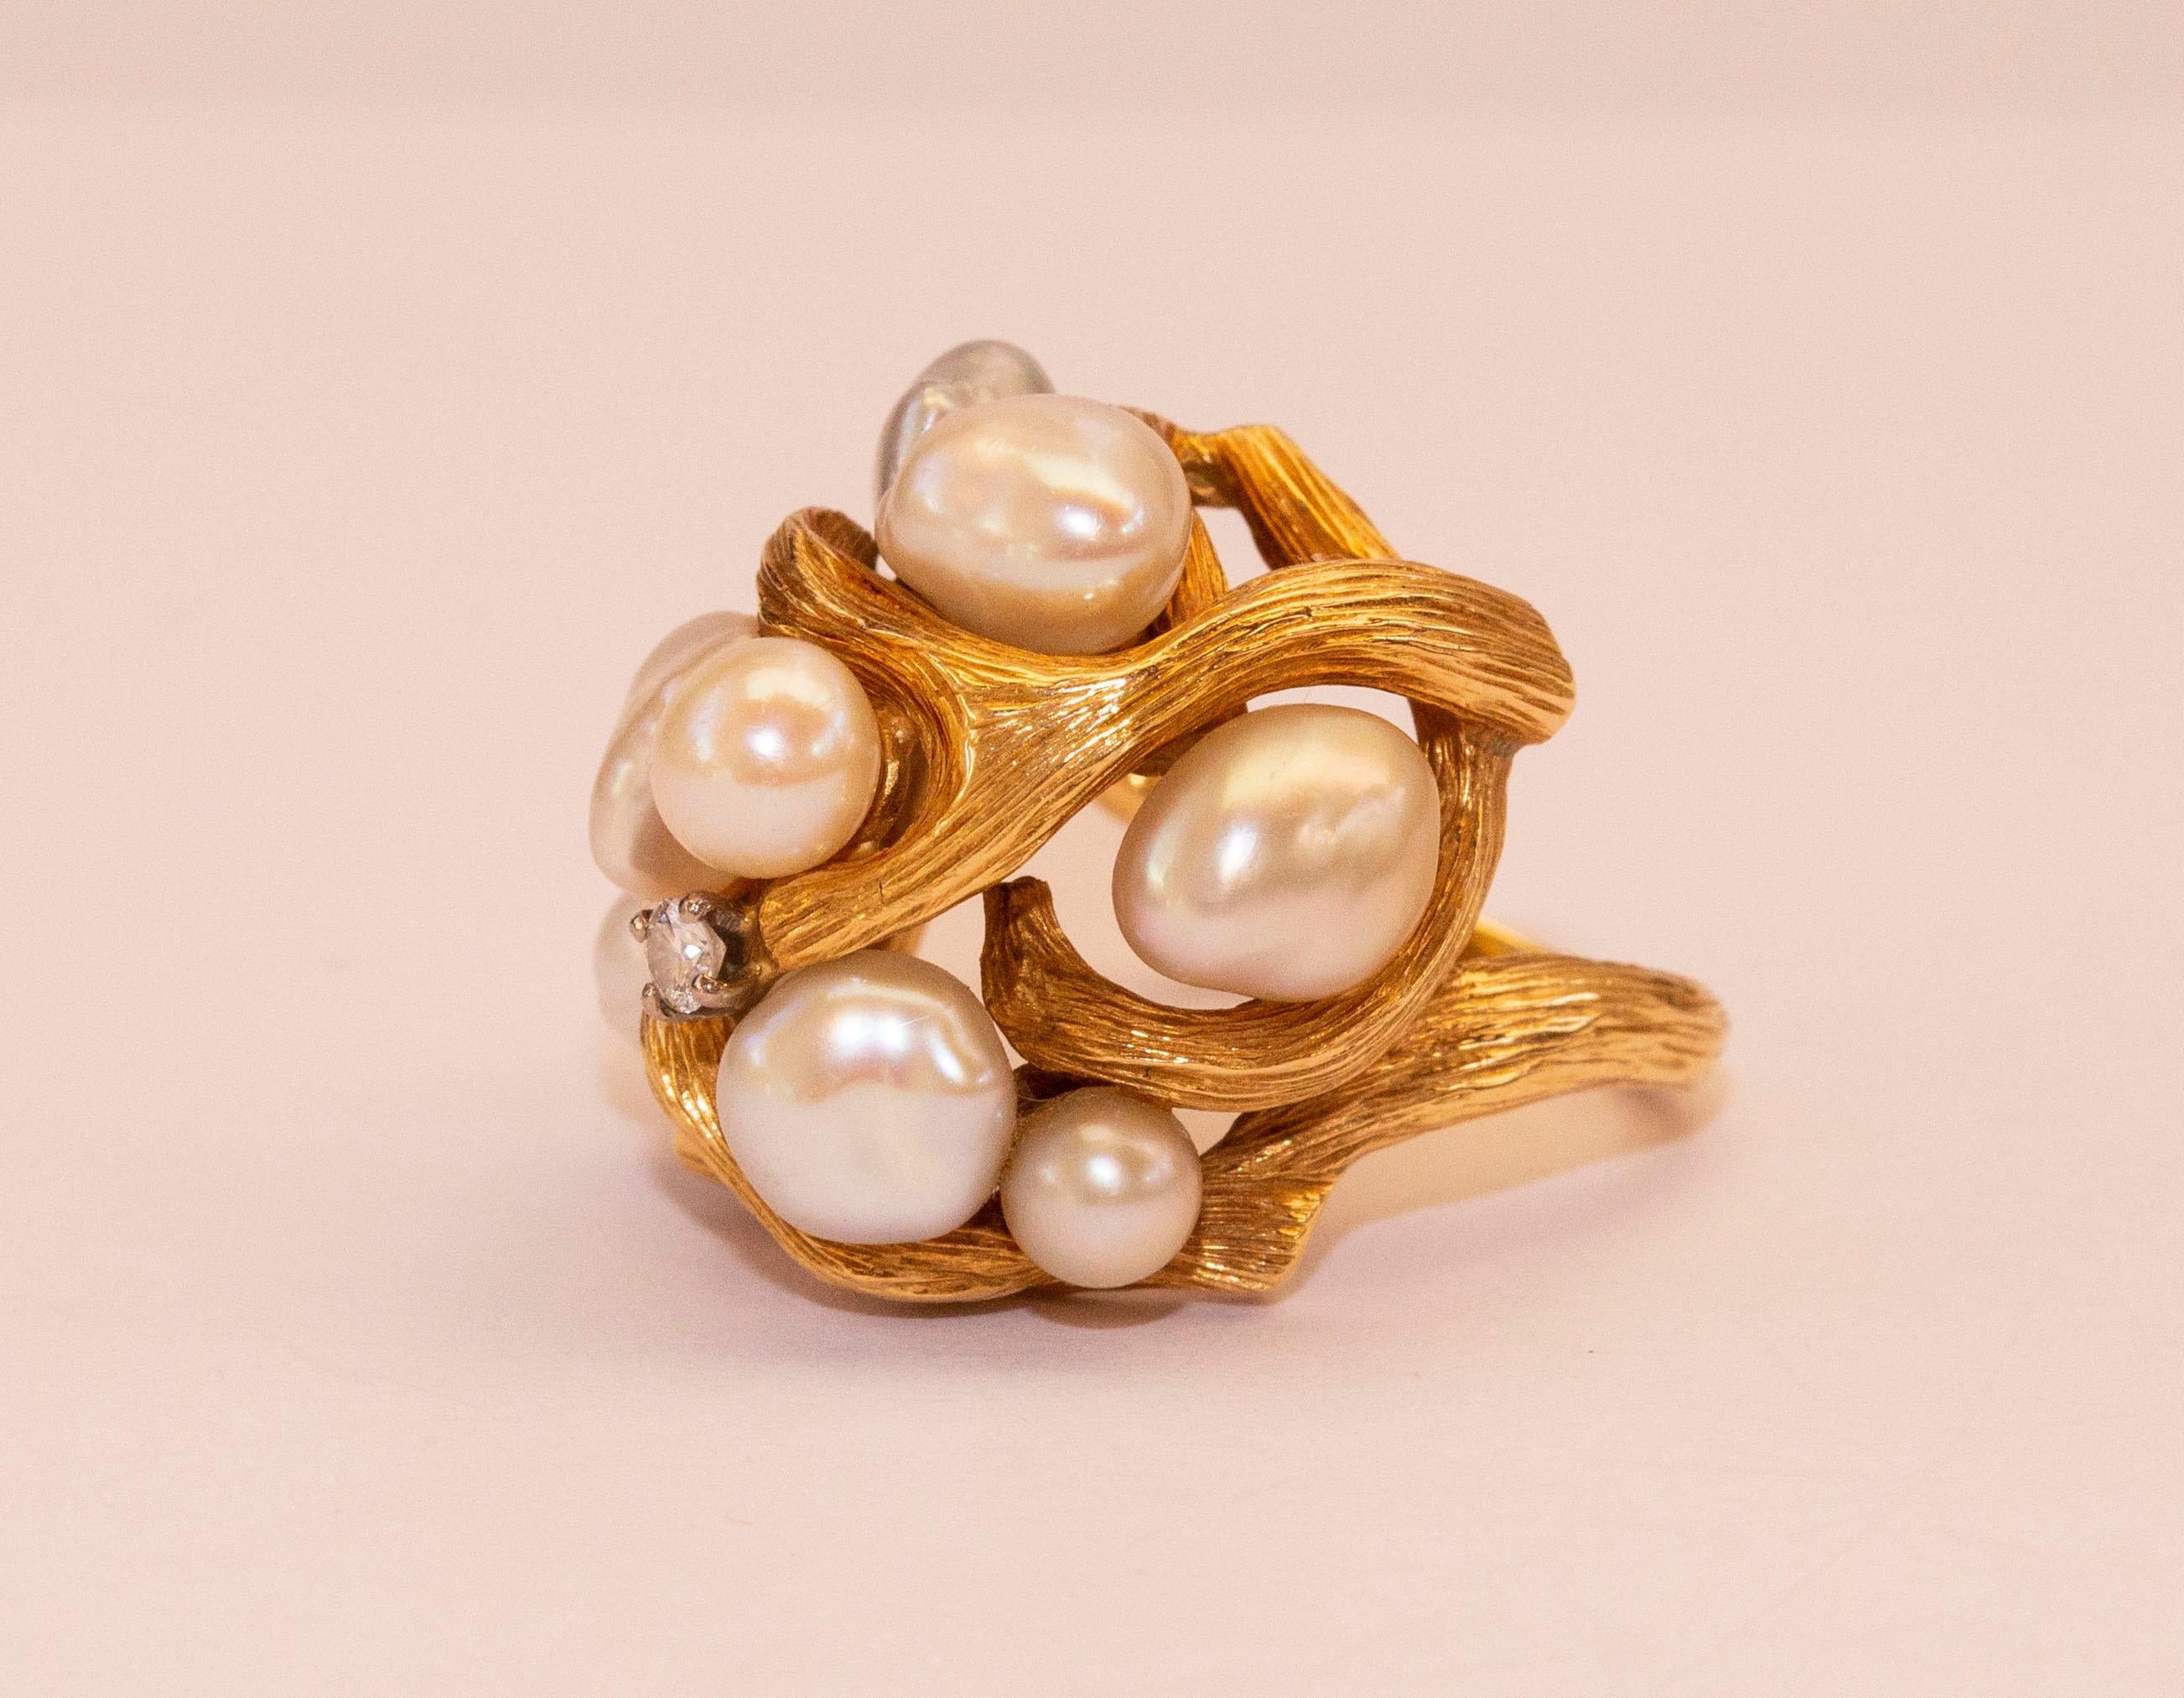 18 Karat Yellow Gold Brutalist Organic Cocktail Ring with Pearls and Diamond In Good Condition For Sale In Arnhem, NL